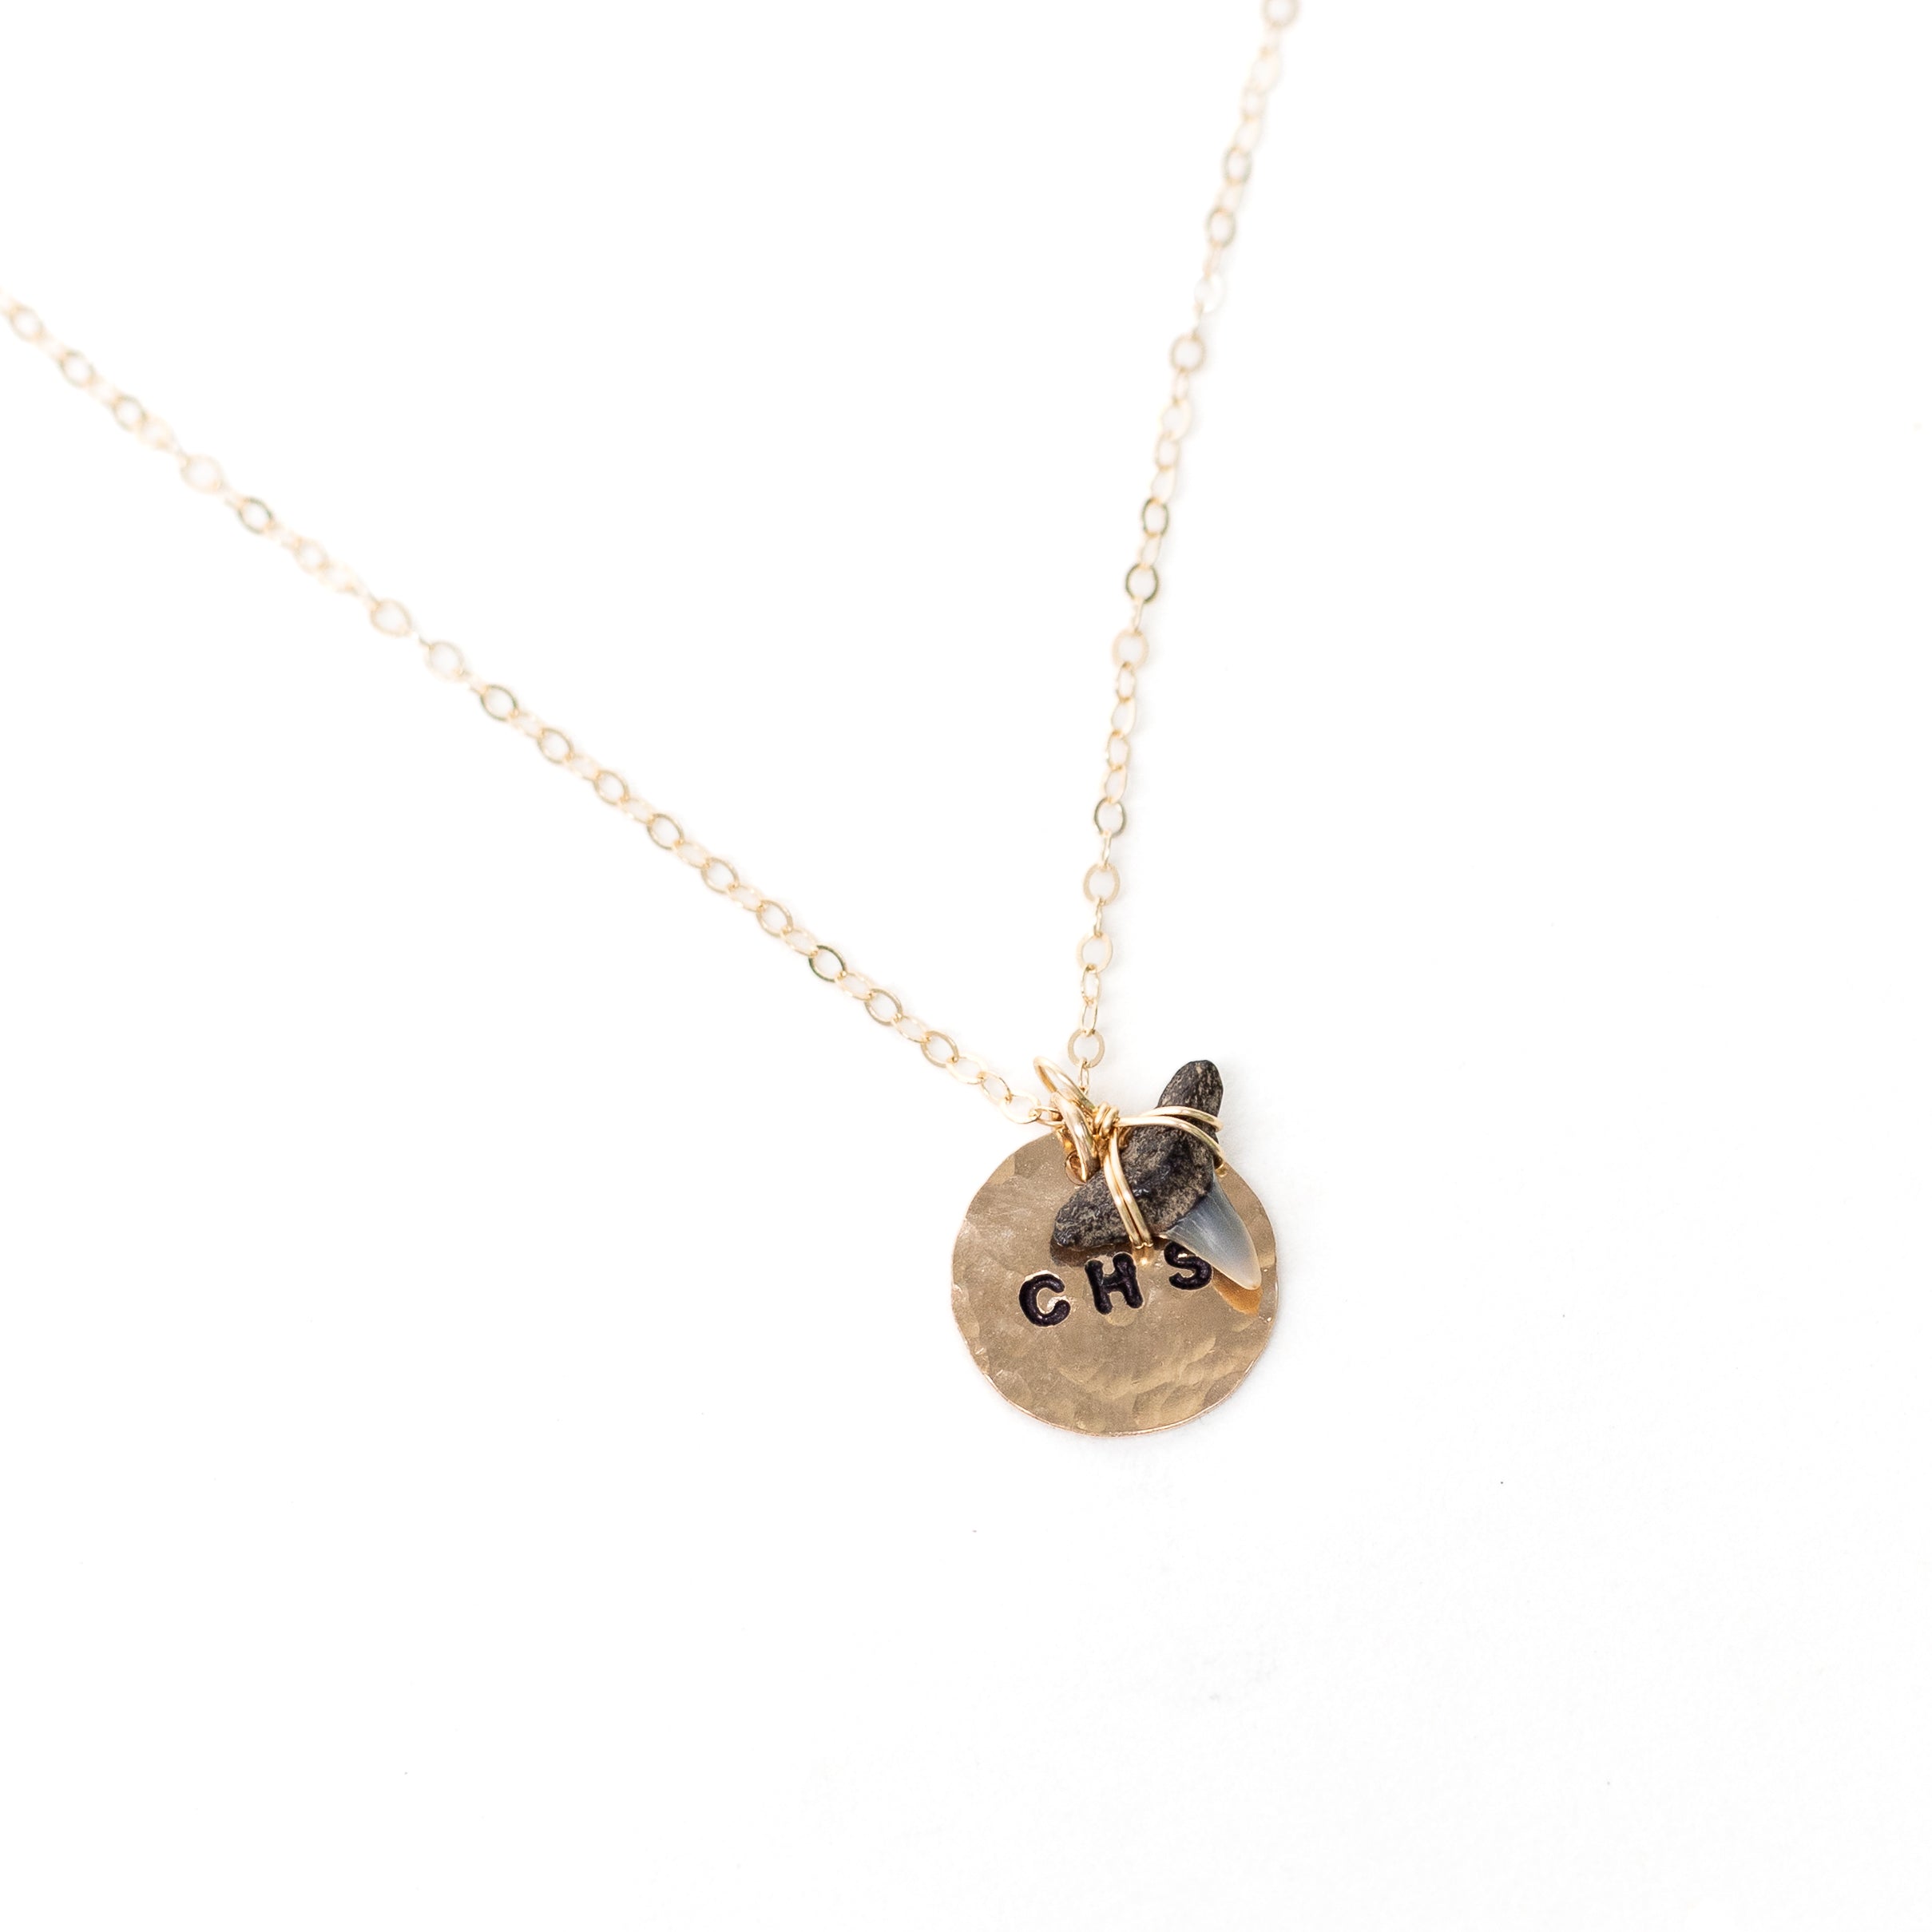 A gold circle stamped necklace with the additional sharks tooth hanging from it.